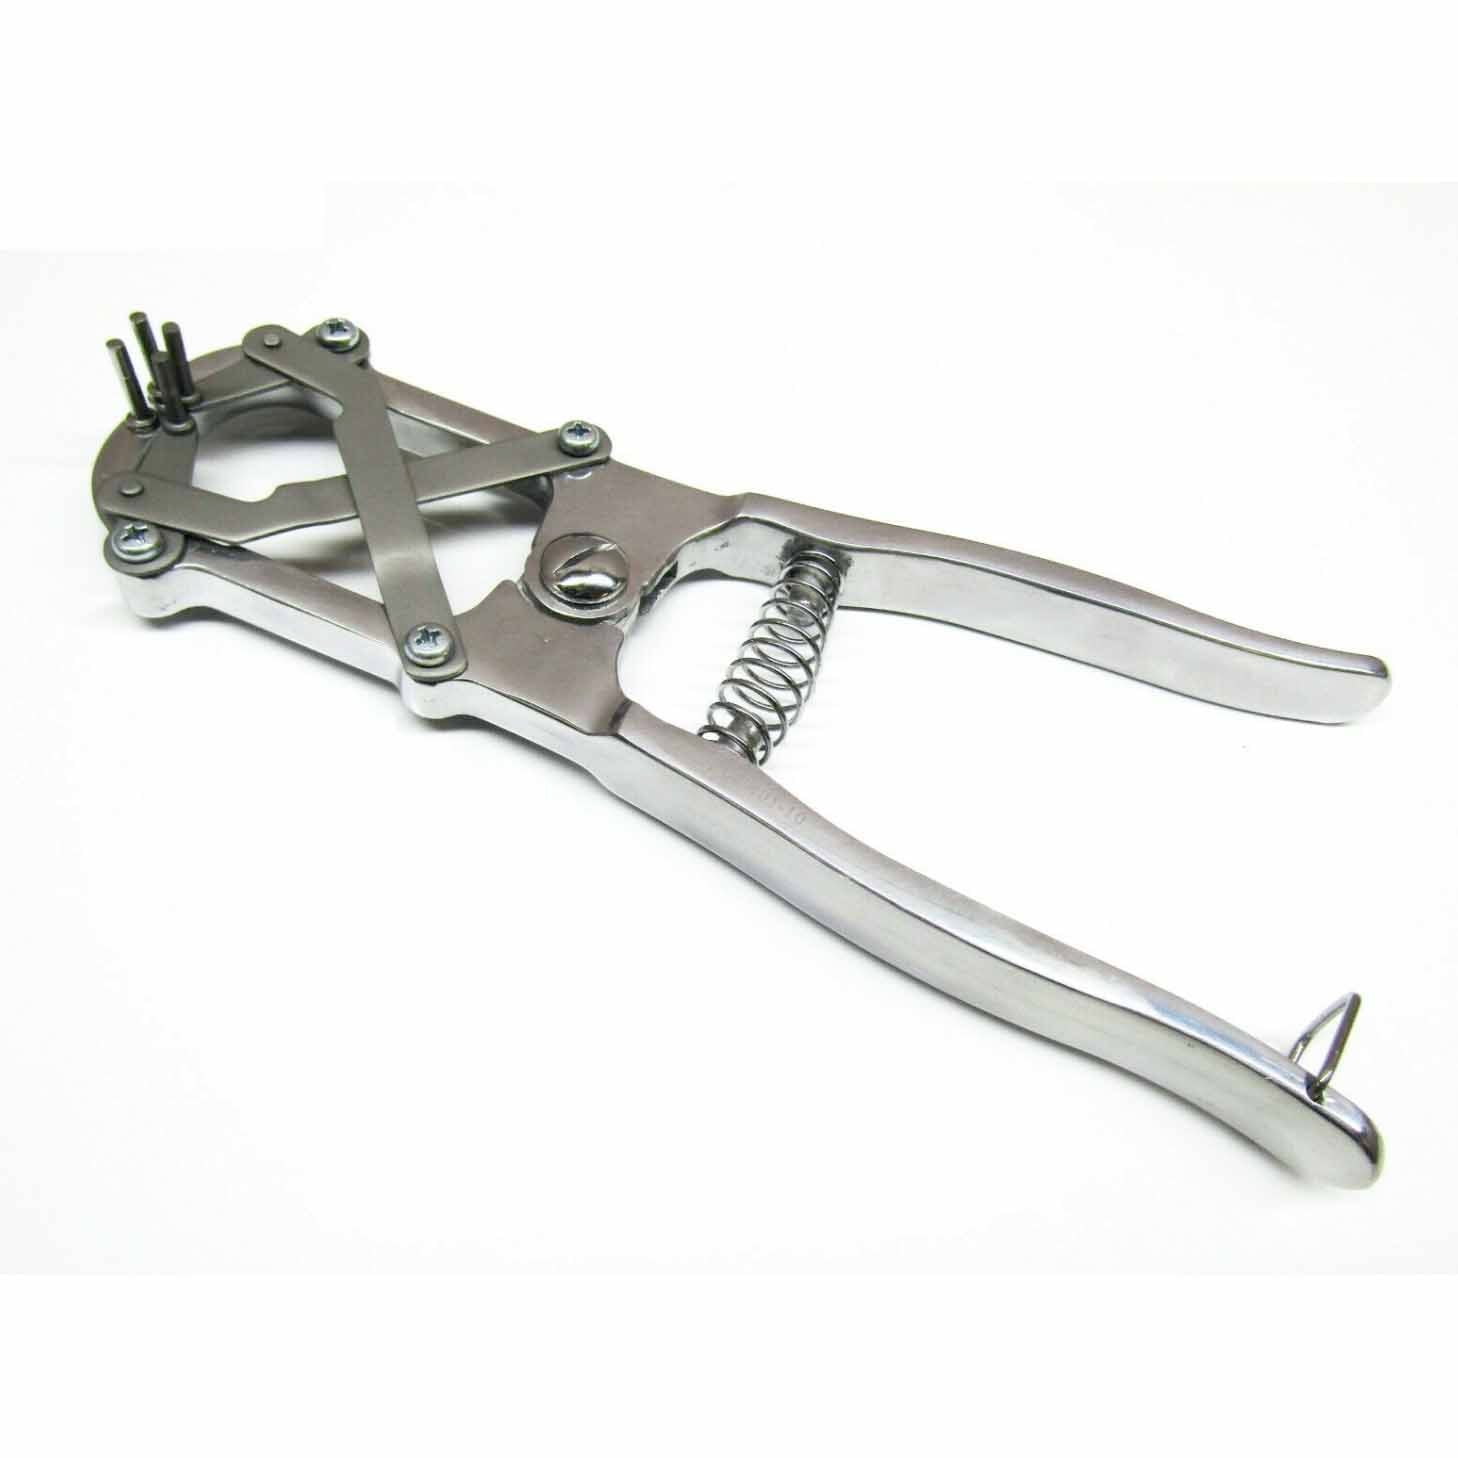 Sheep, Marking, Ring, Applicator, Castration, Pliers, Stainless Steel,  Premium 